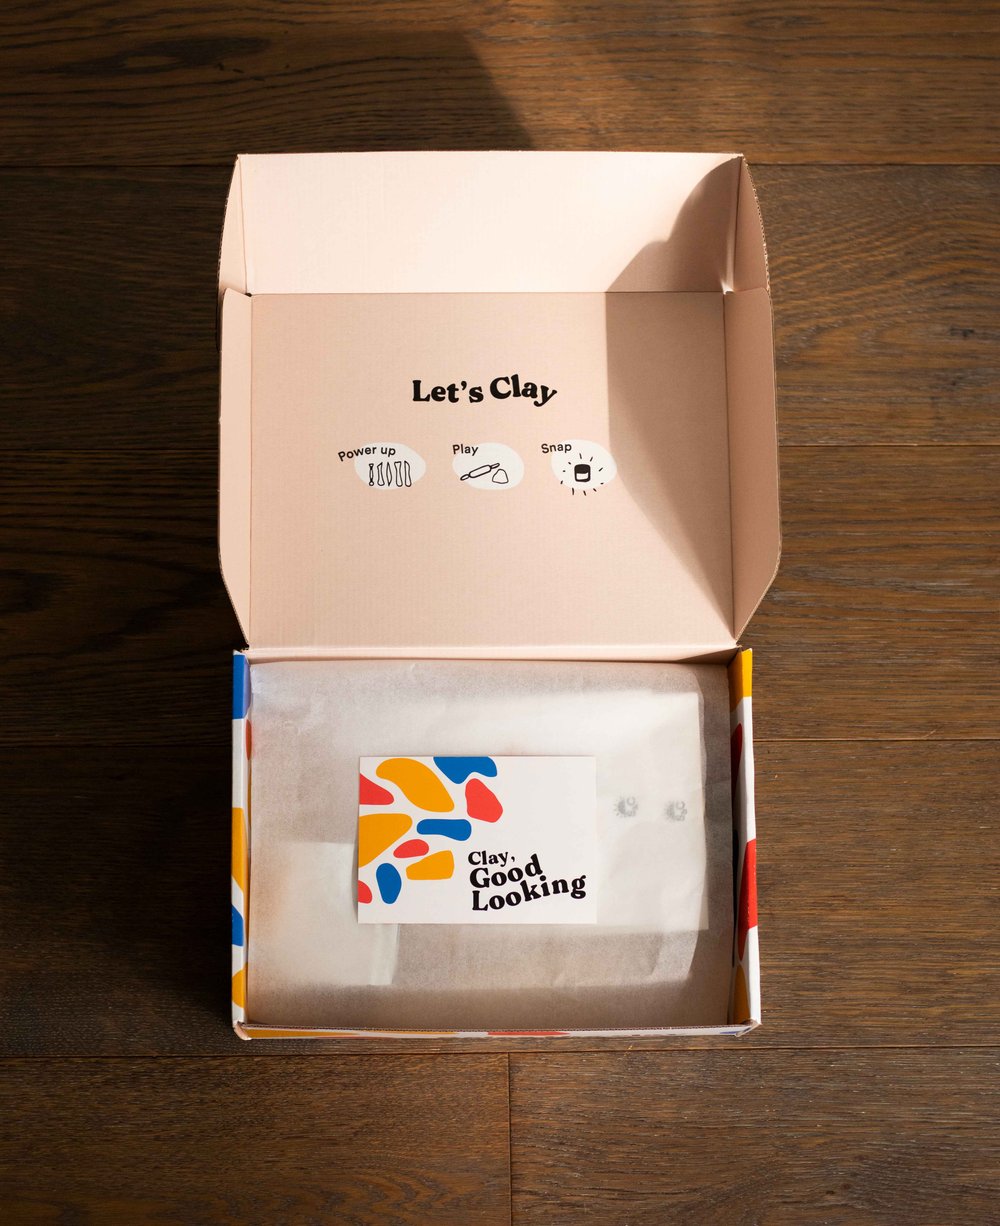 The Sunday&Clay air dry clay kit, let's clay! What's inside the box? Take a look!